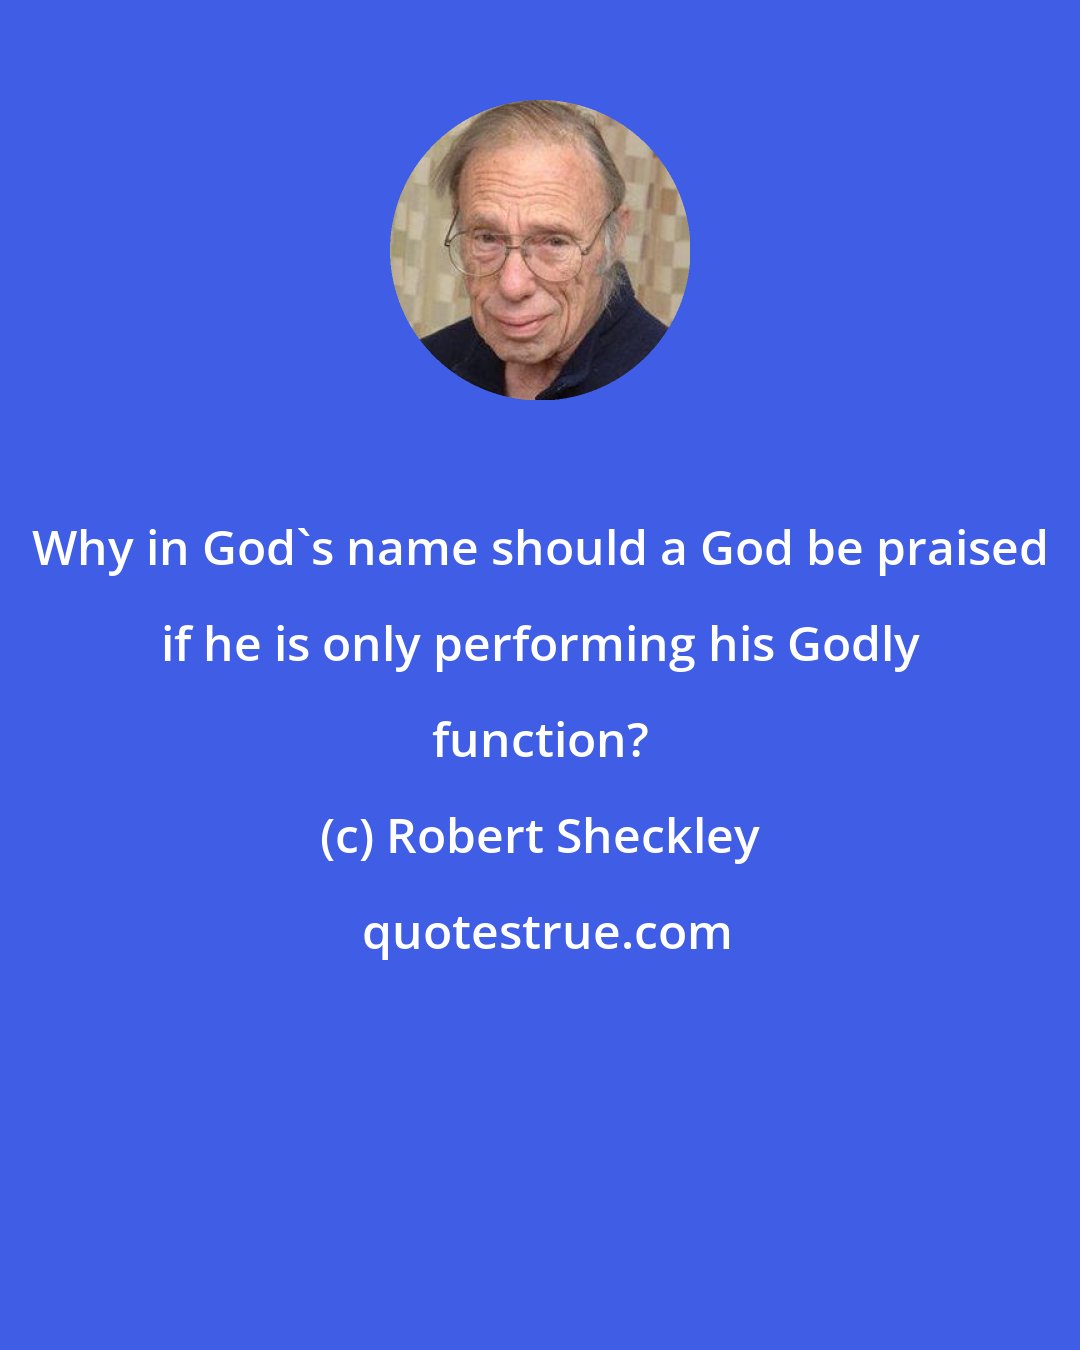 Robert Sheckley: Why in God's name should a God be praised if he is only performing his Godly function?